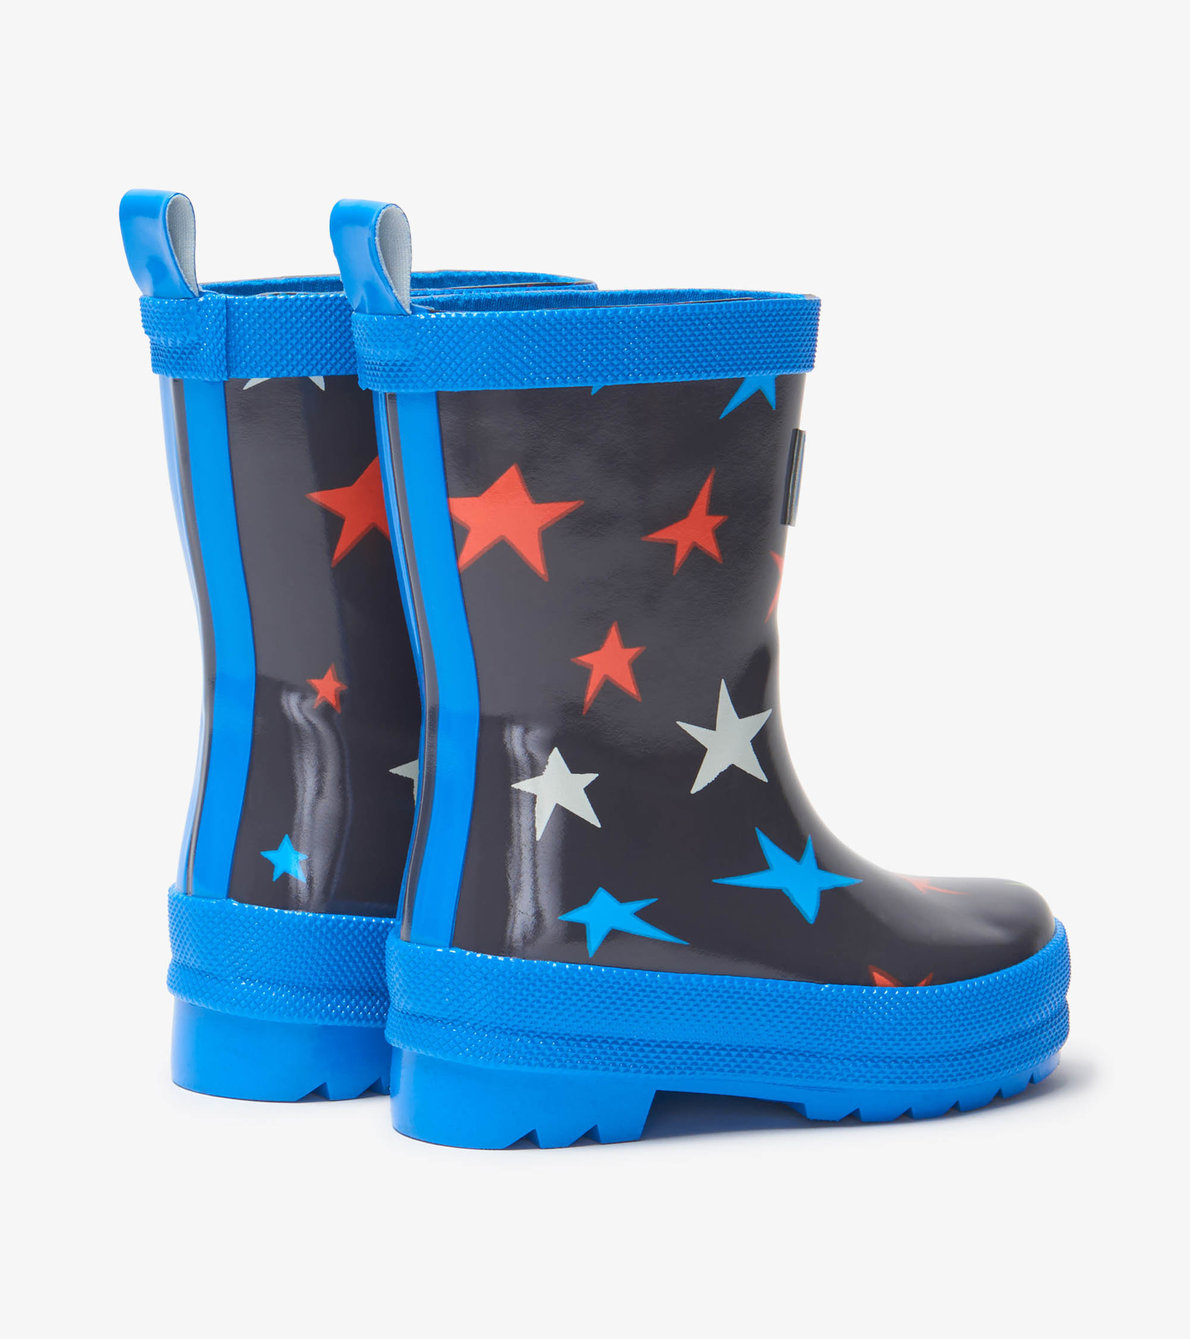 View larger image of My 1st Wellies - Ombre Stars